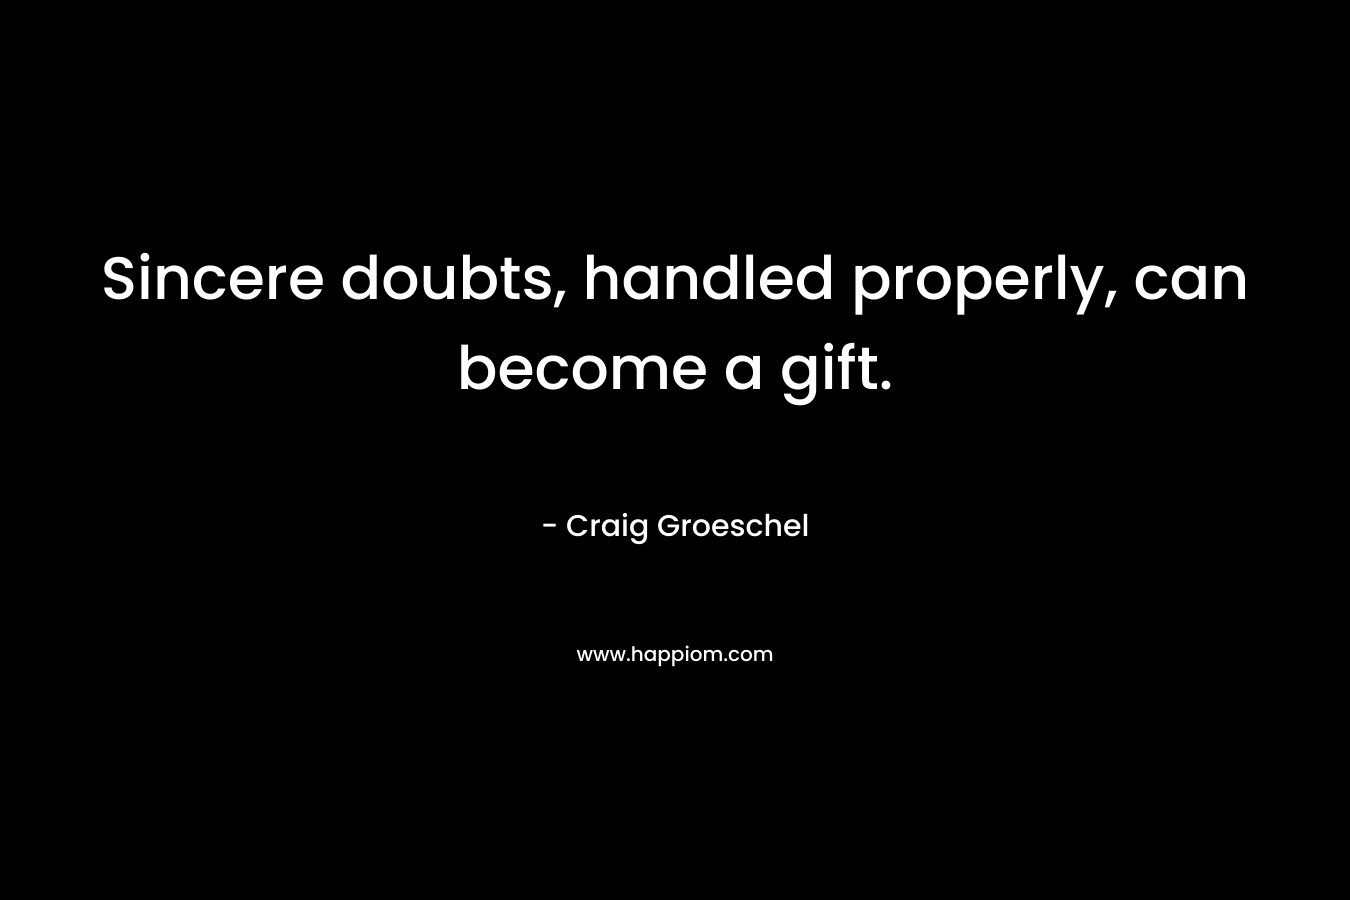 Sincere doubts, handled properly, can become a gift. – Craig Groeschel